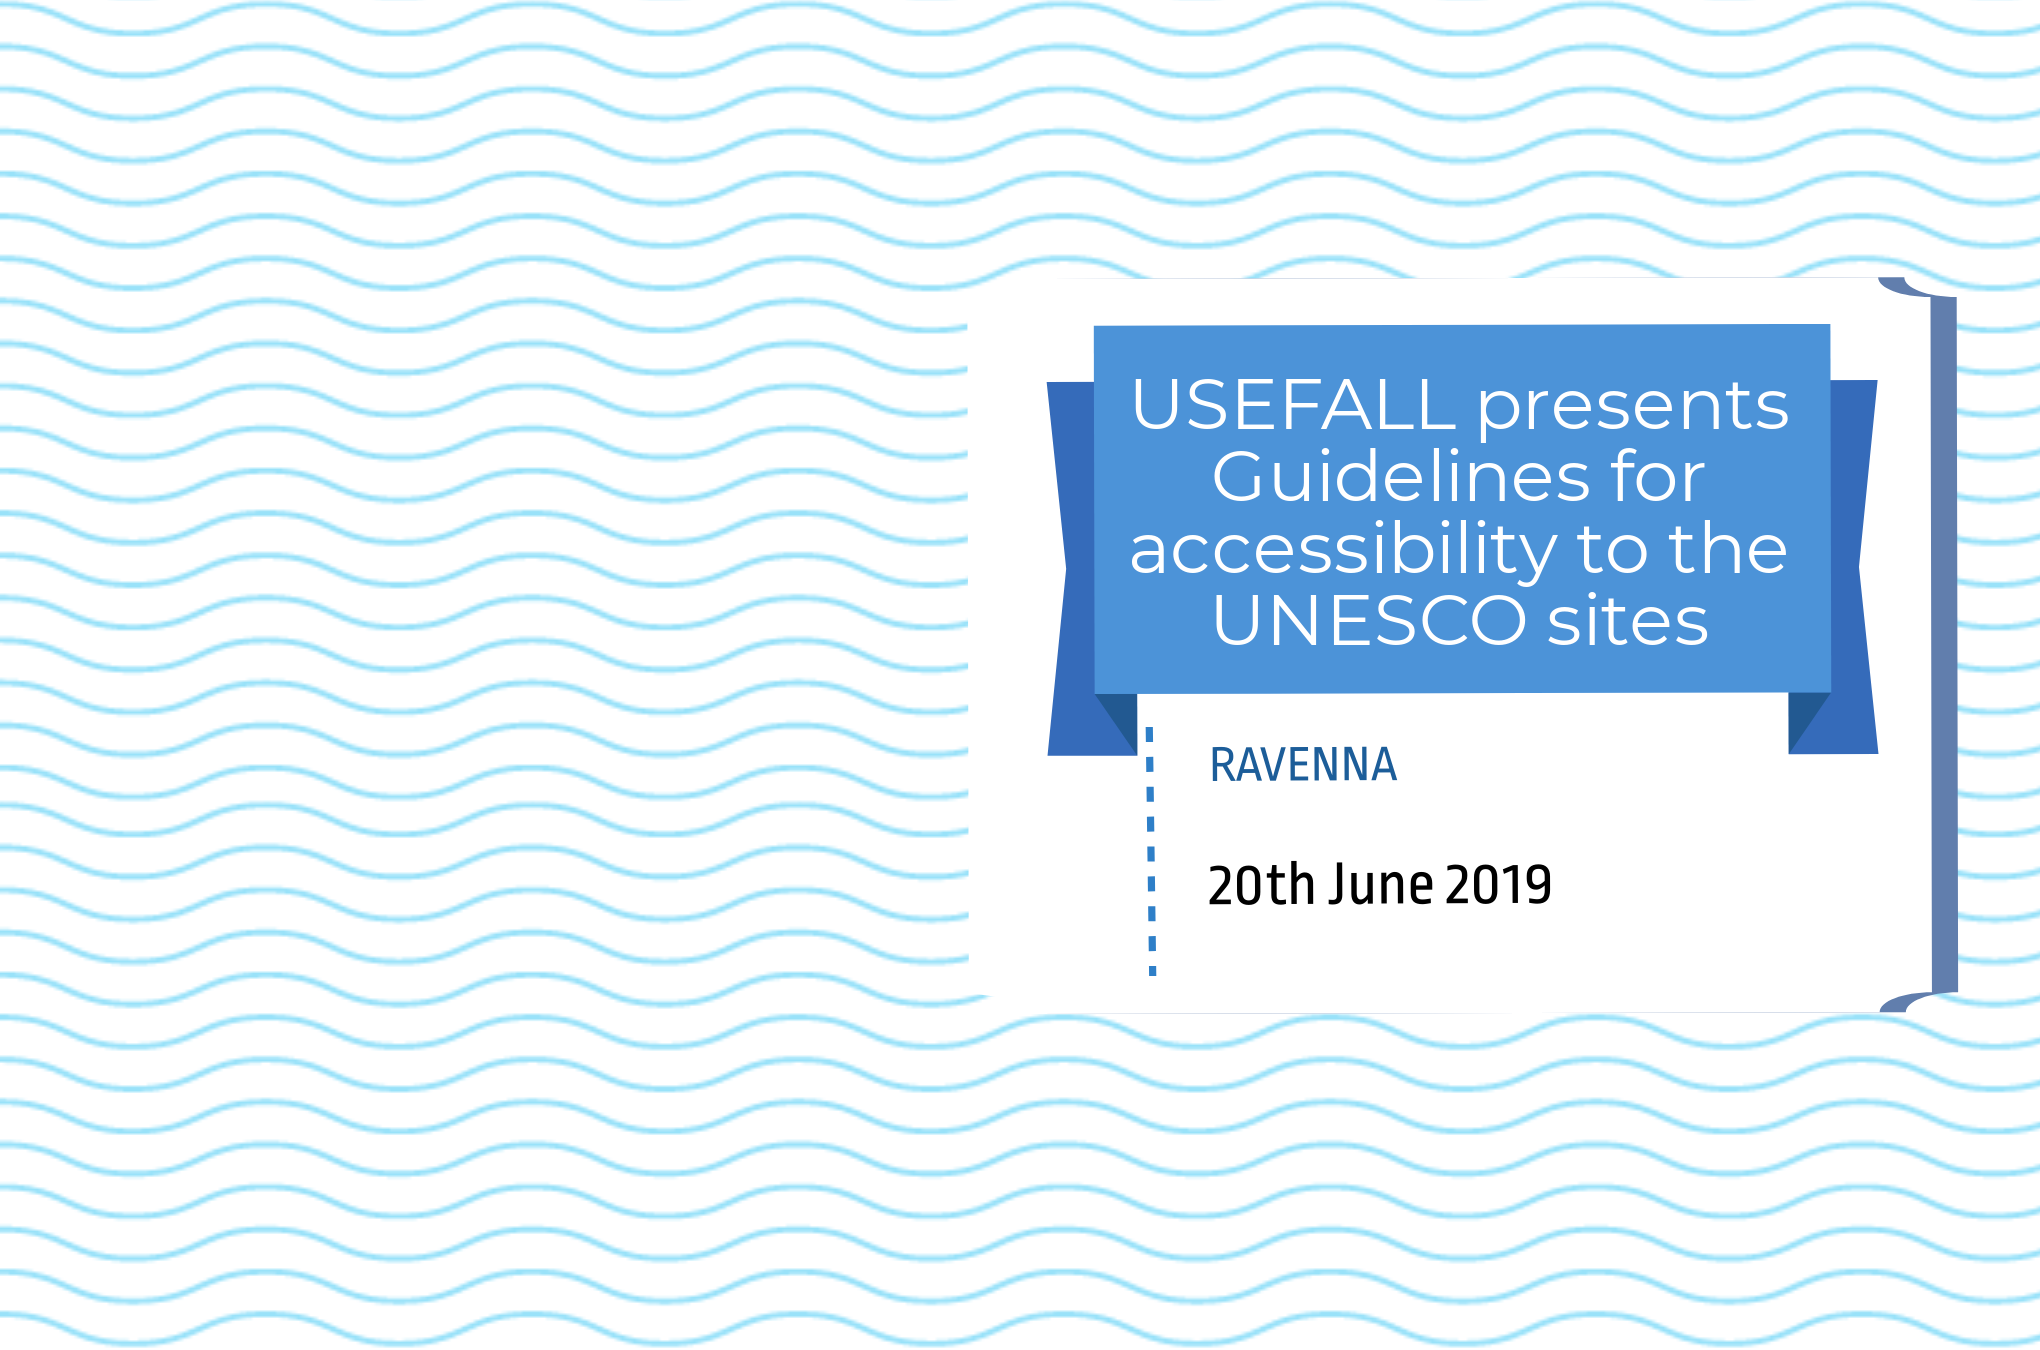 USEFALL presents Guidelines for accessibility to the UNESCO sites